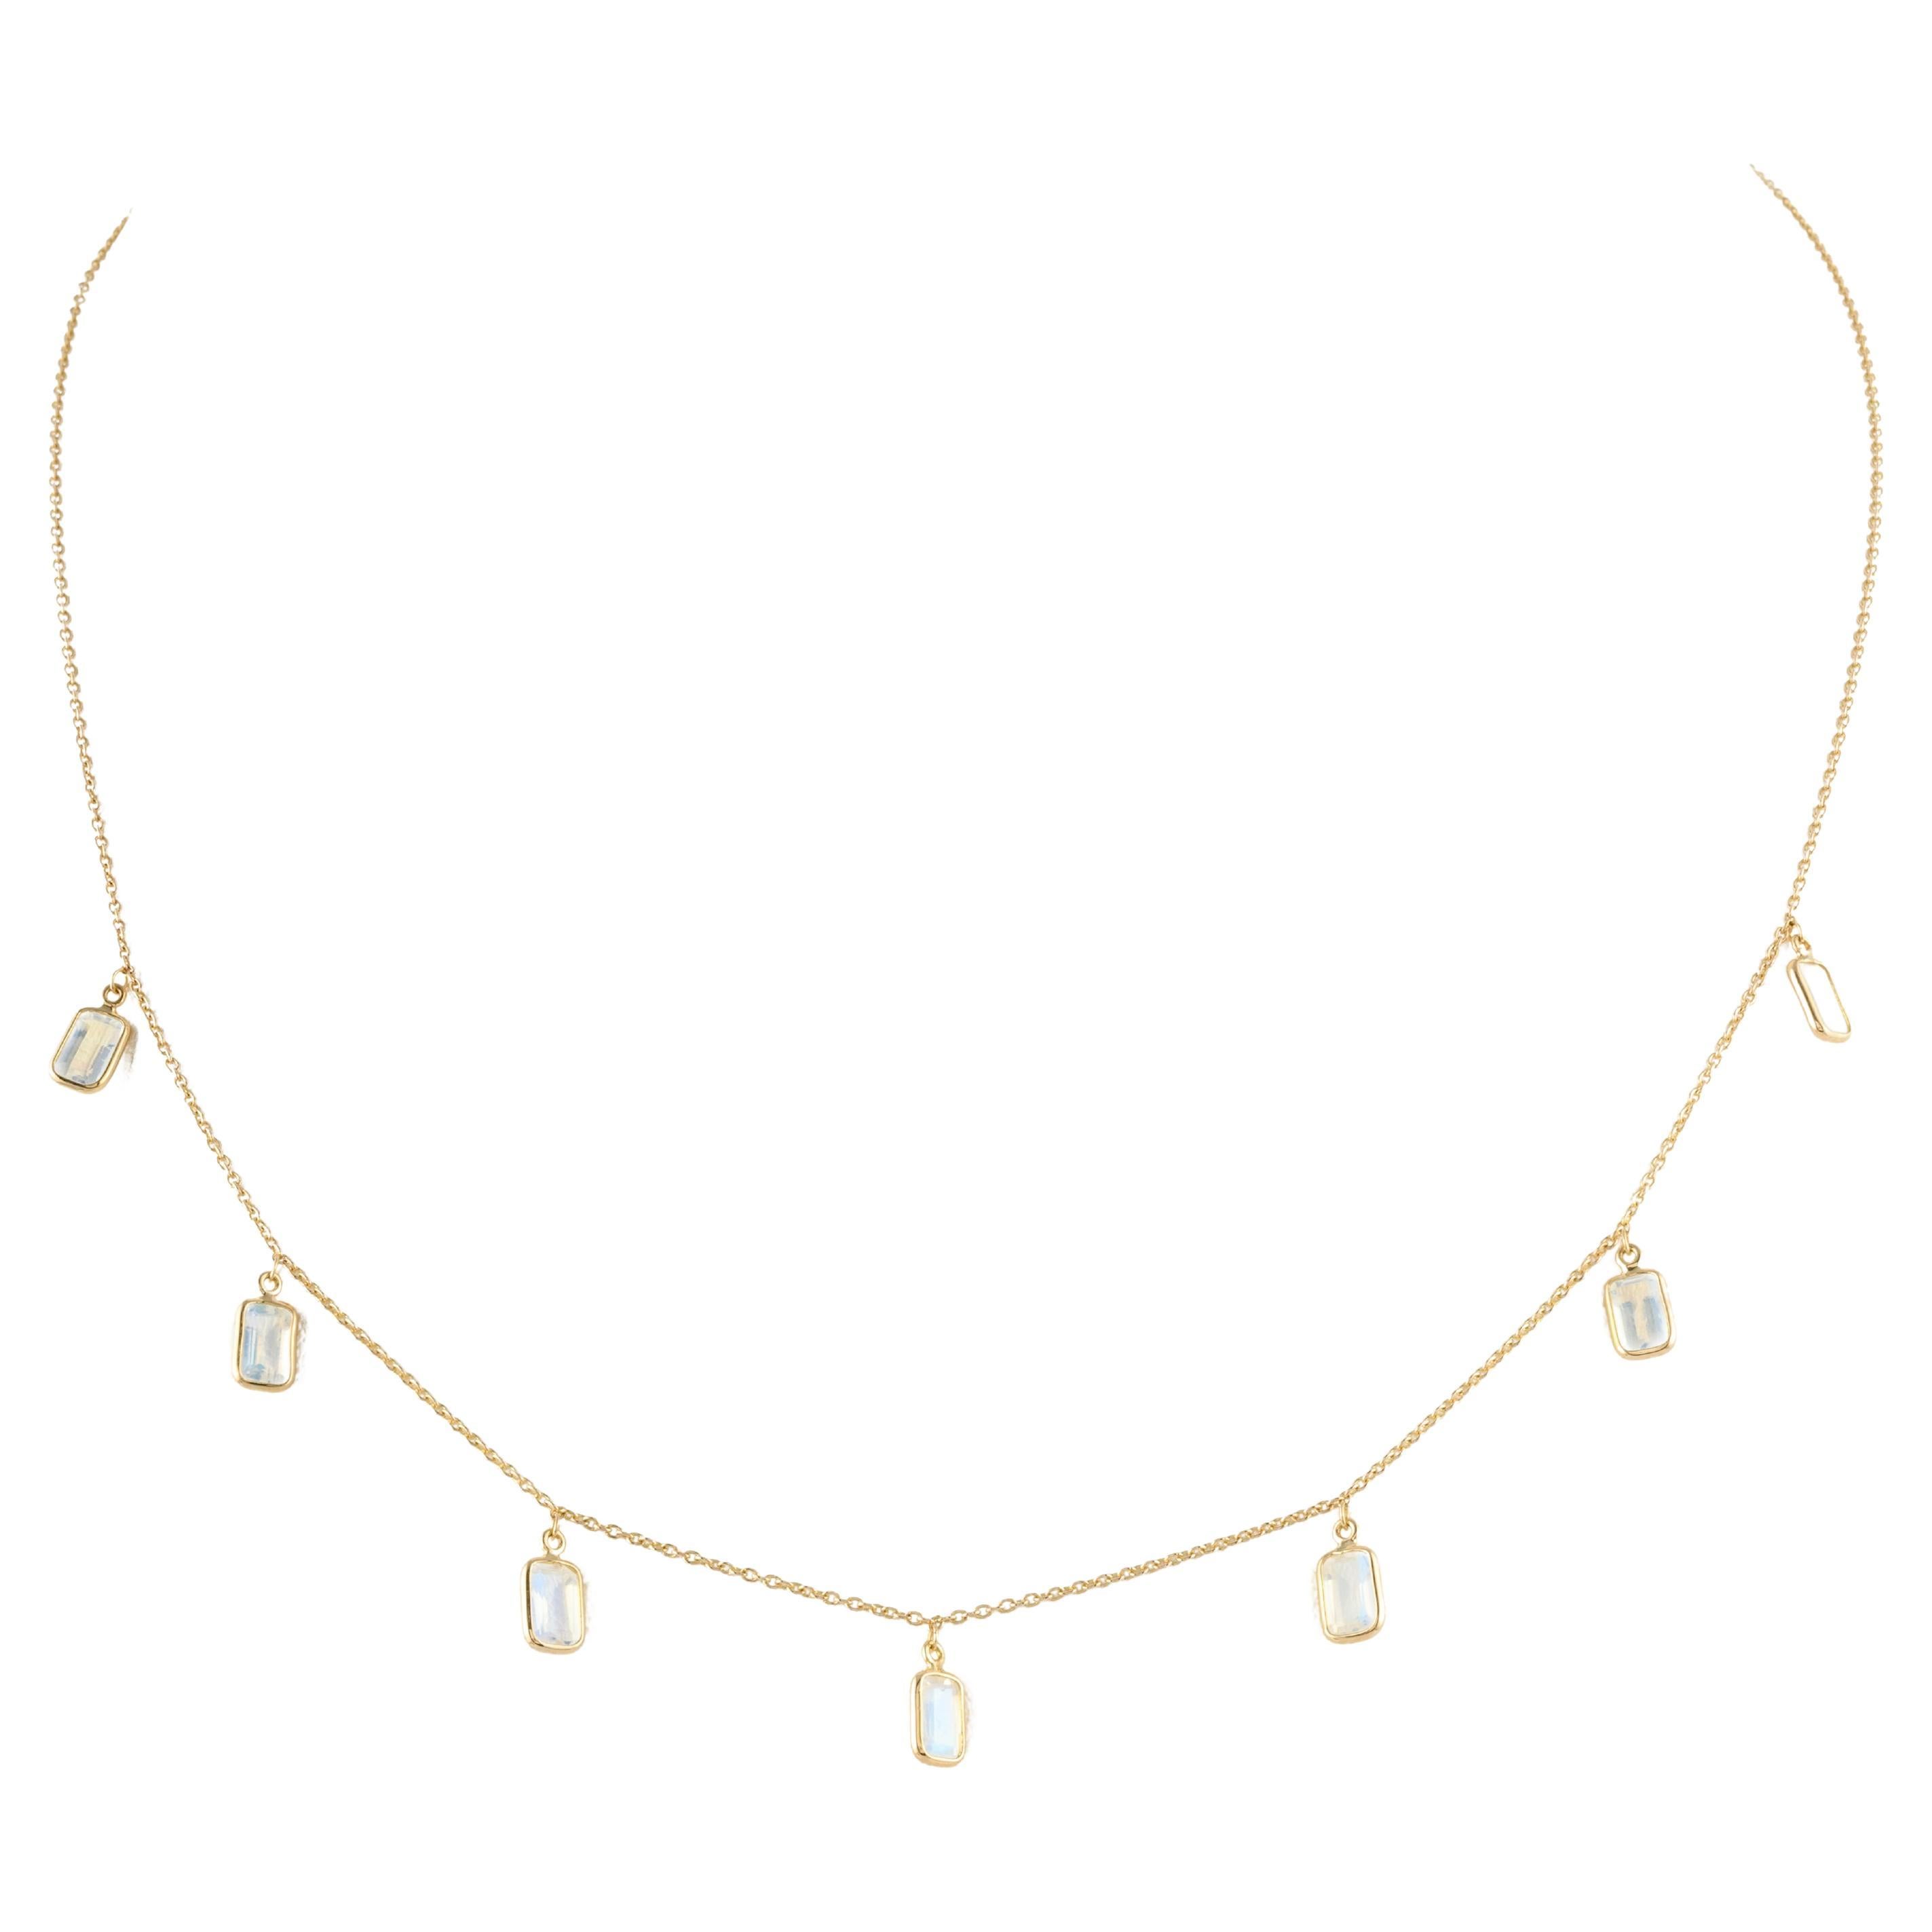 Rainbow Moonstone Chain Necklace Gift for Girlfriend in 18k Solid Yellow Gold For Sale